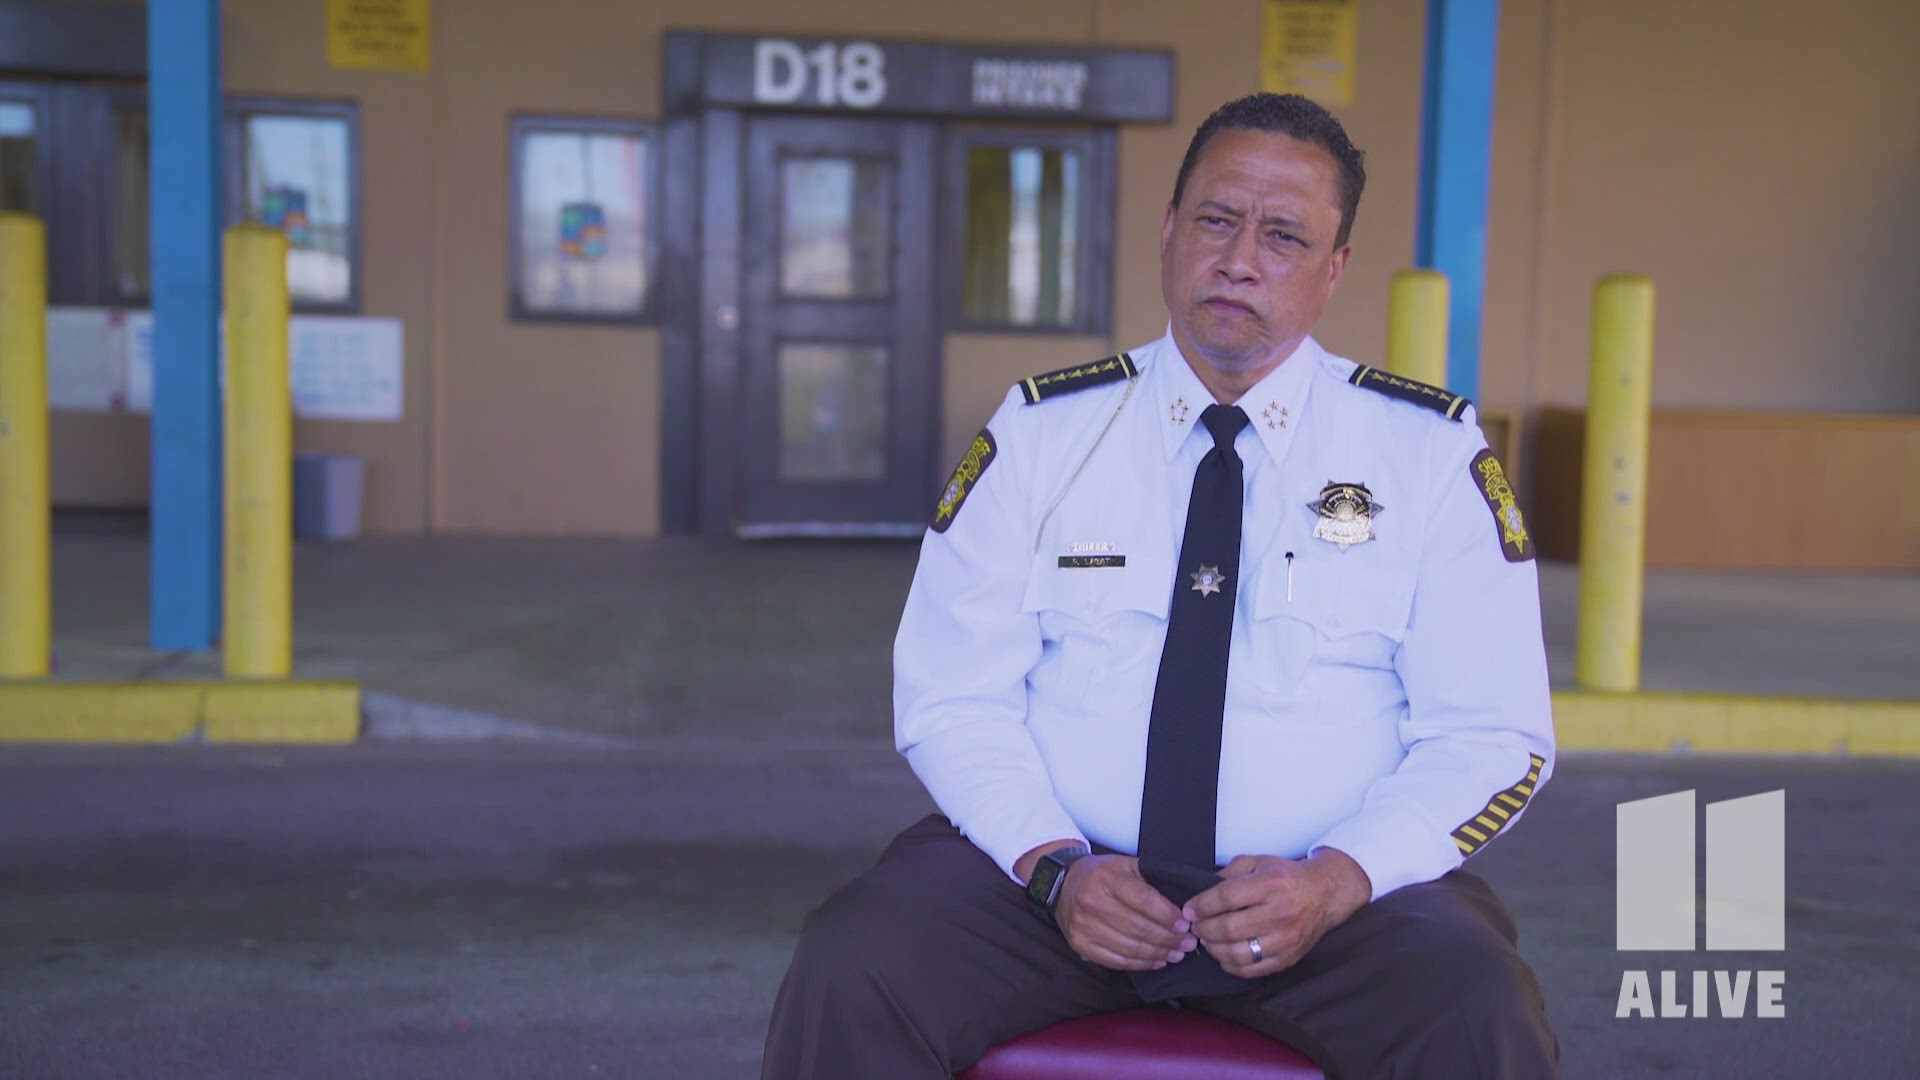 In the debate of whether to keep the Atlanta City Detention Center, Sheriff Labat says it needs to stay open.